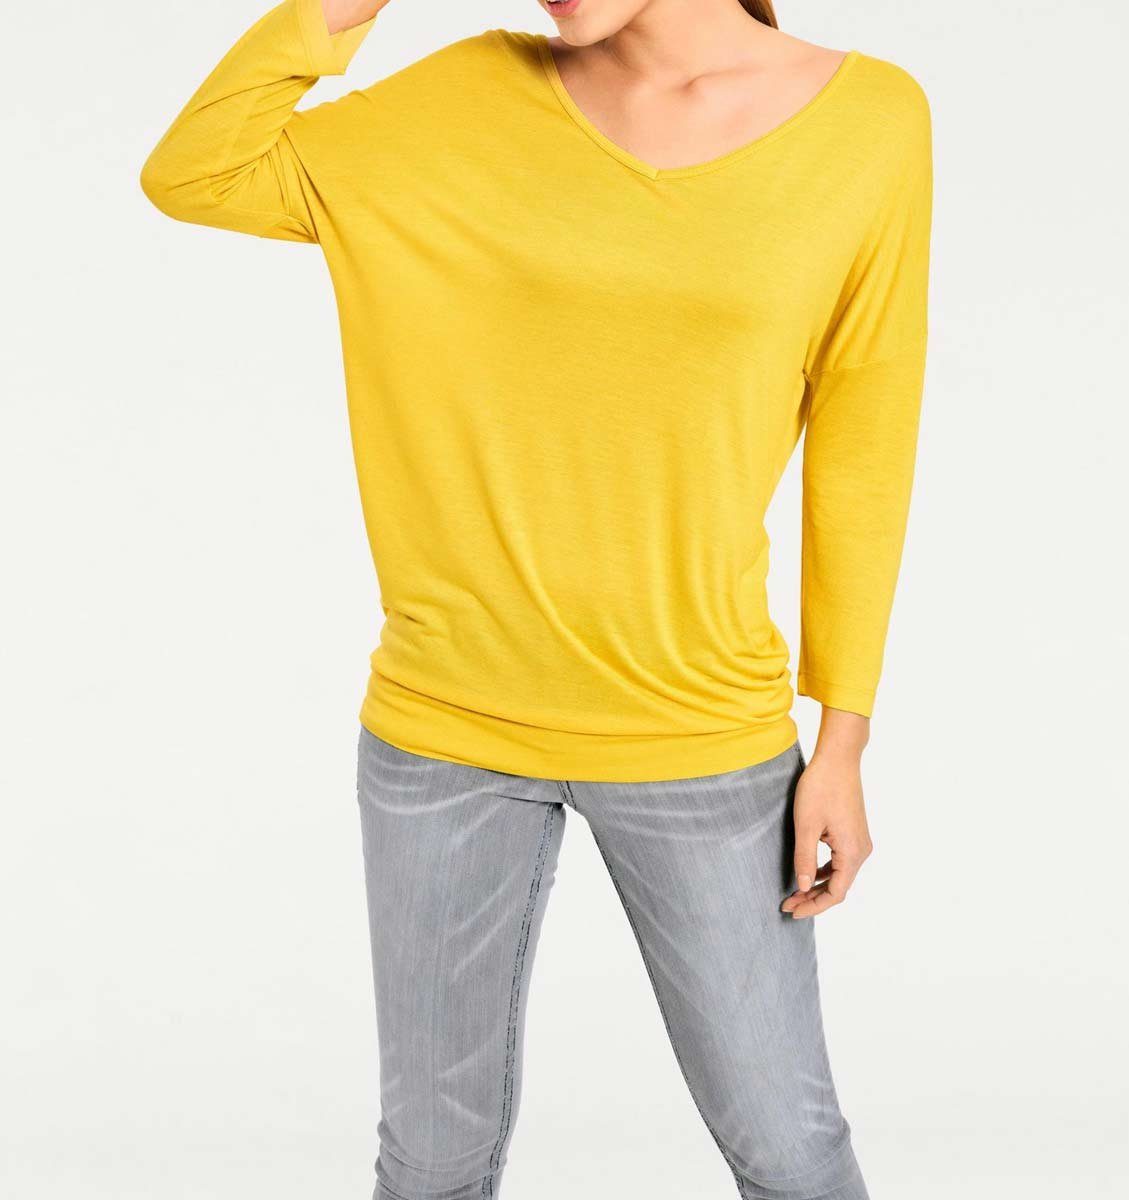 gelb Oversized-Shirt, Connections Best Connection Oversize-Shirt heine Heine by B.C. Best - Damen